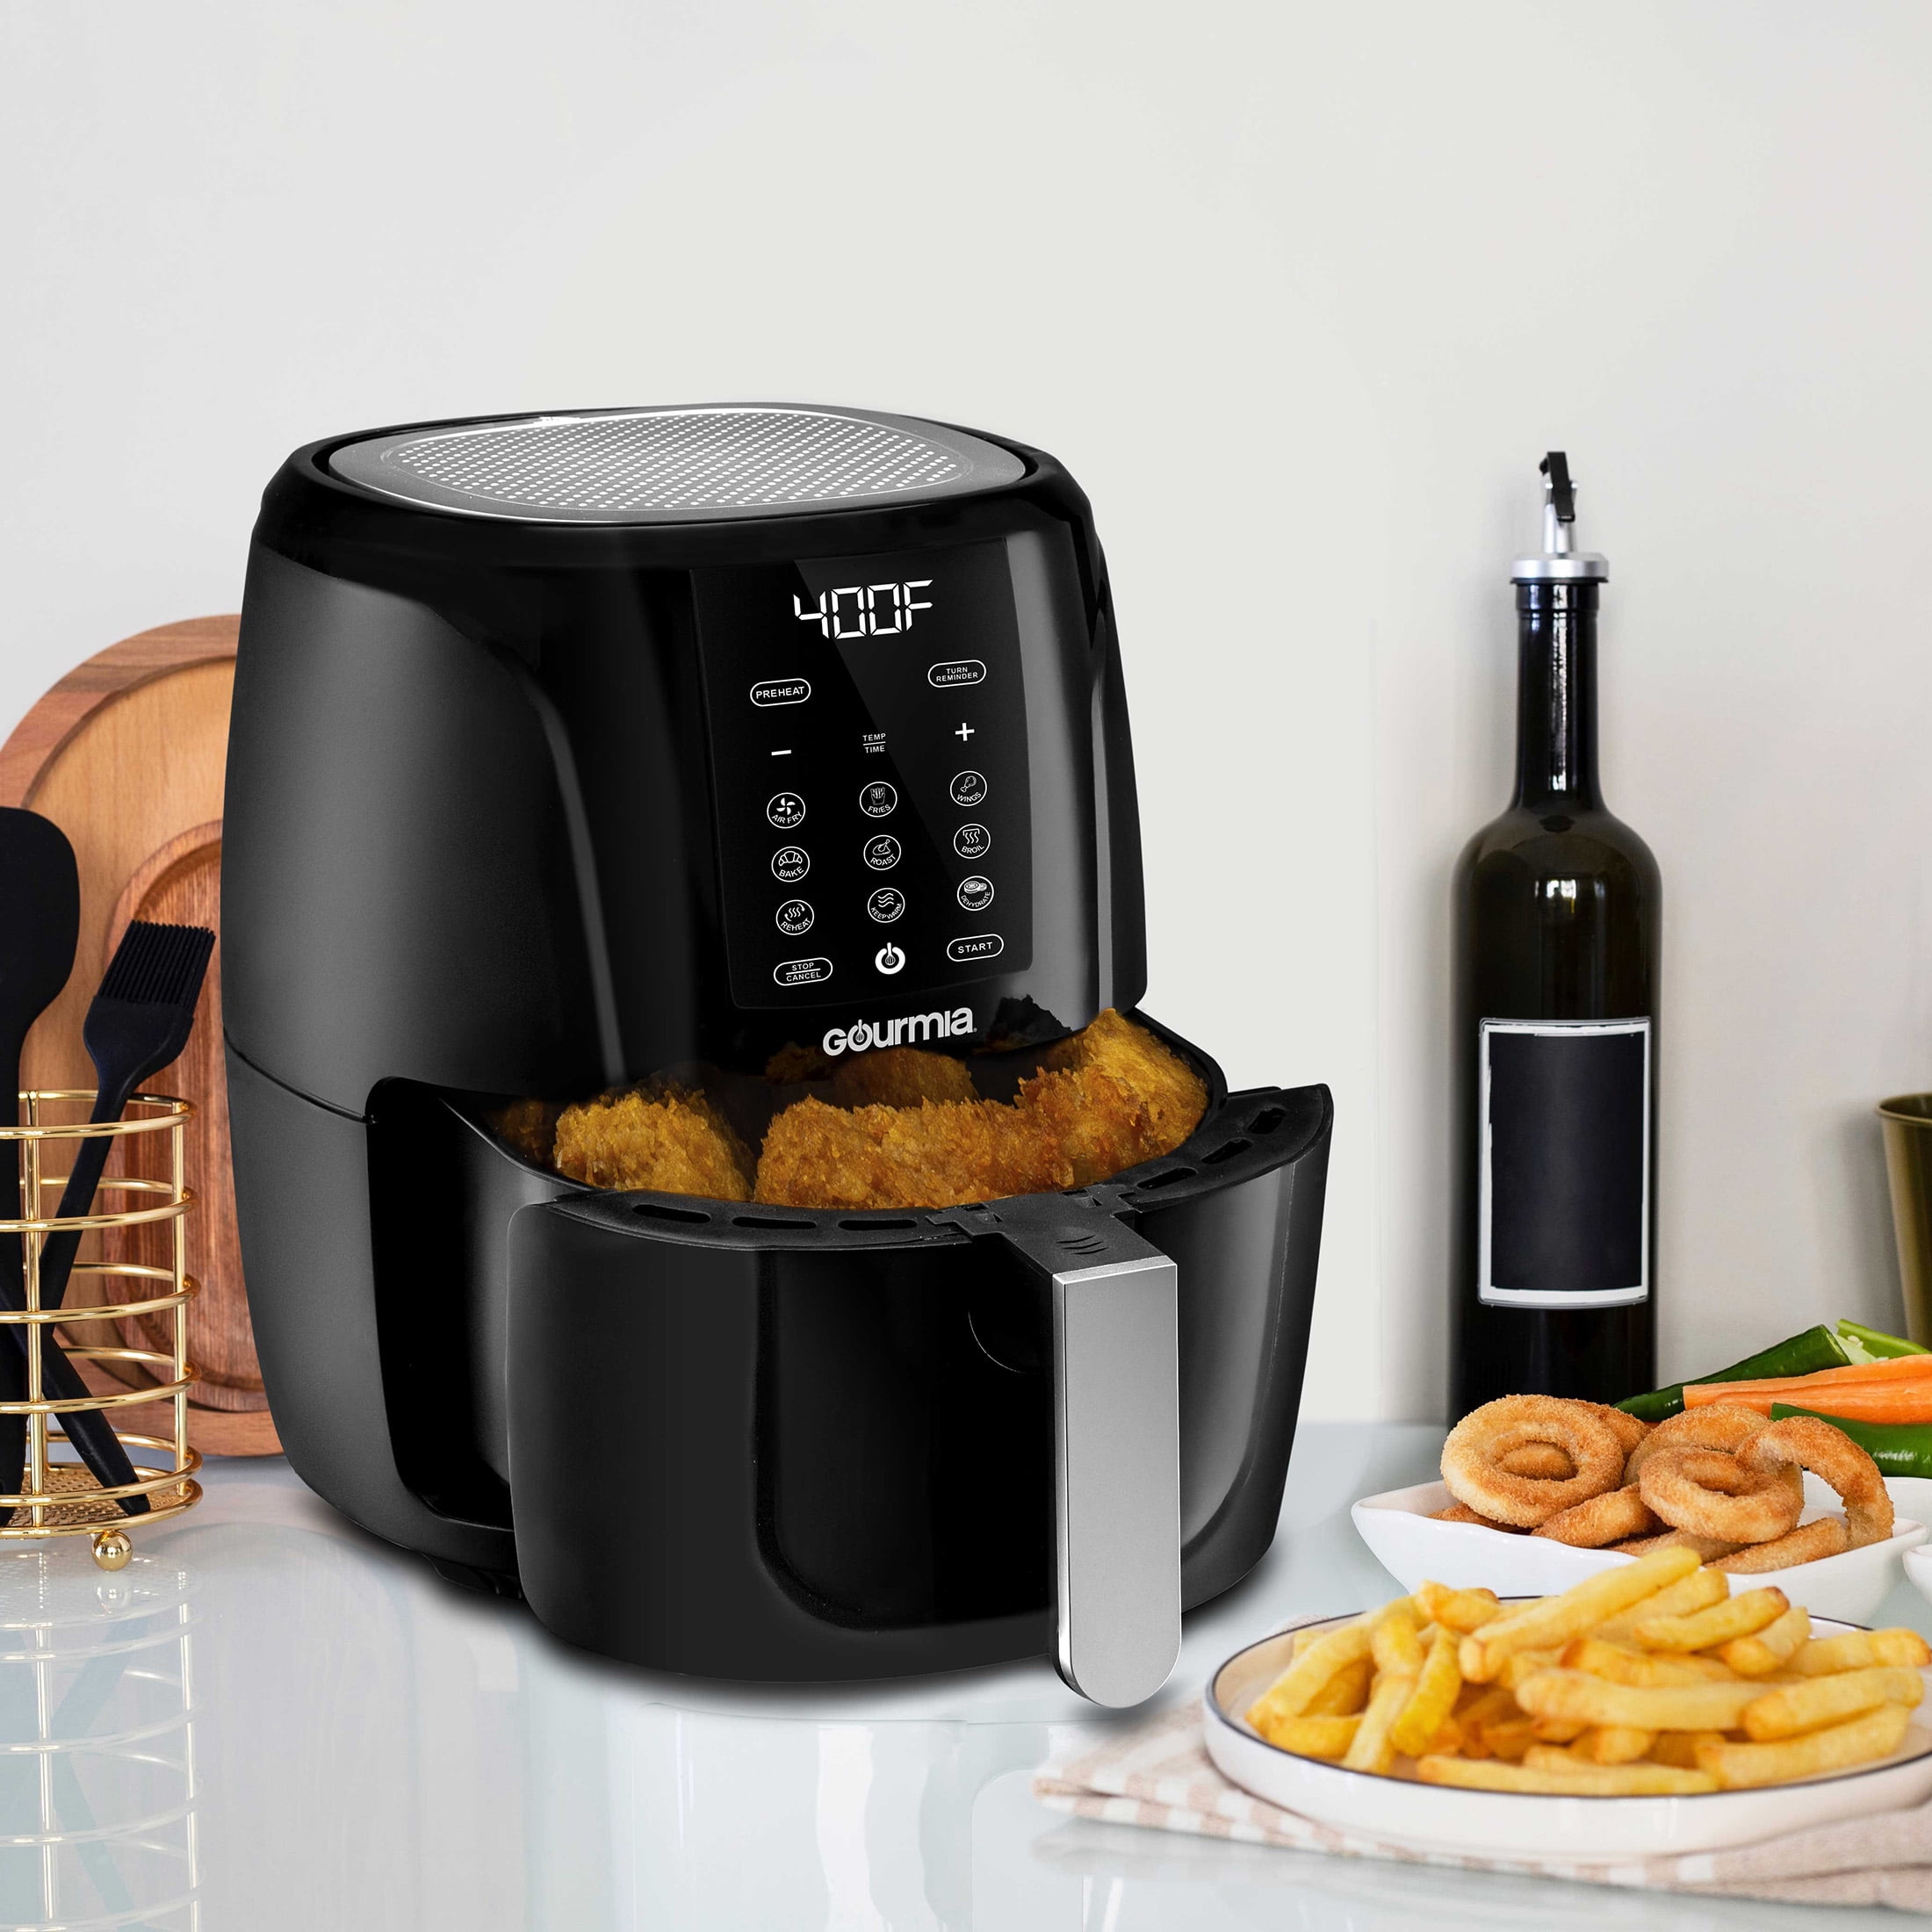 Gourmia 5 Qt Digital Air Fryer with 9 One-Touch Presets, Black